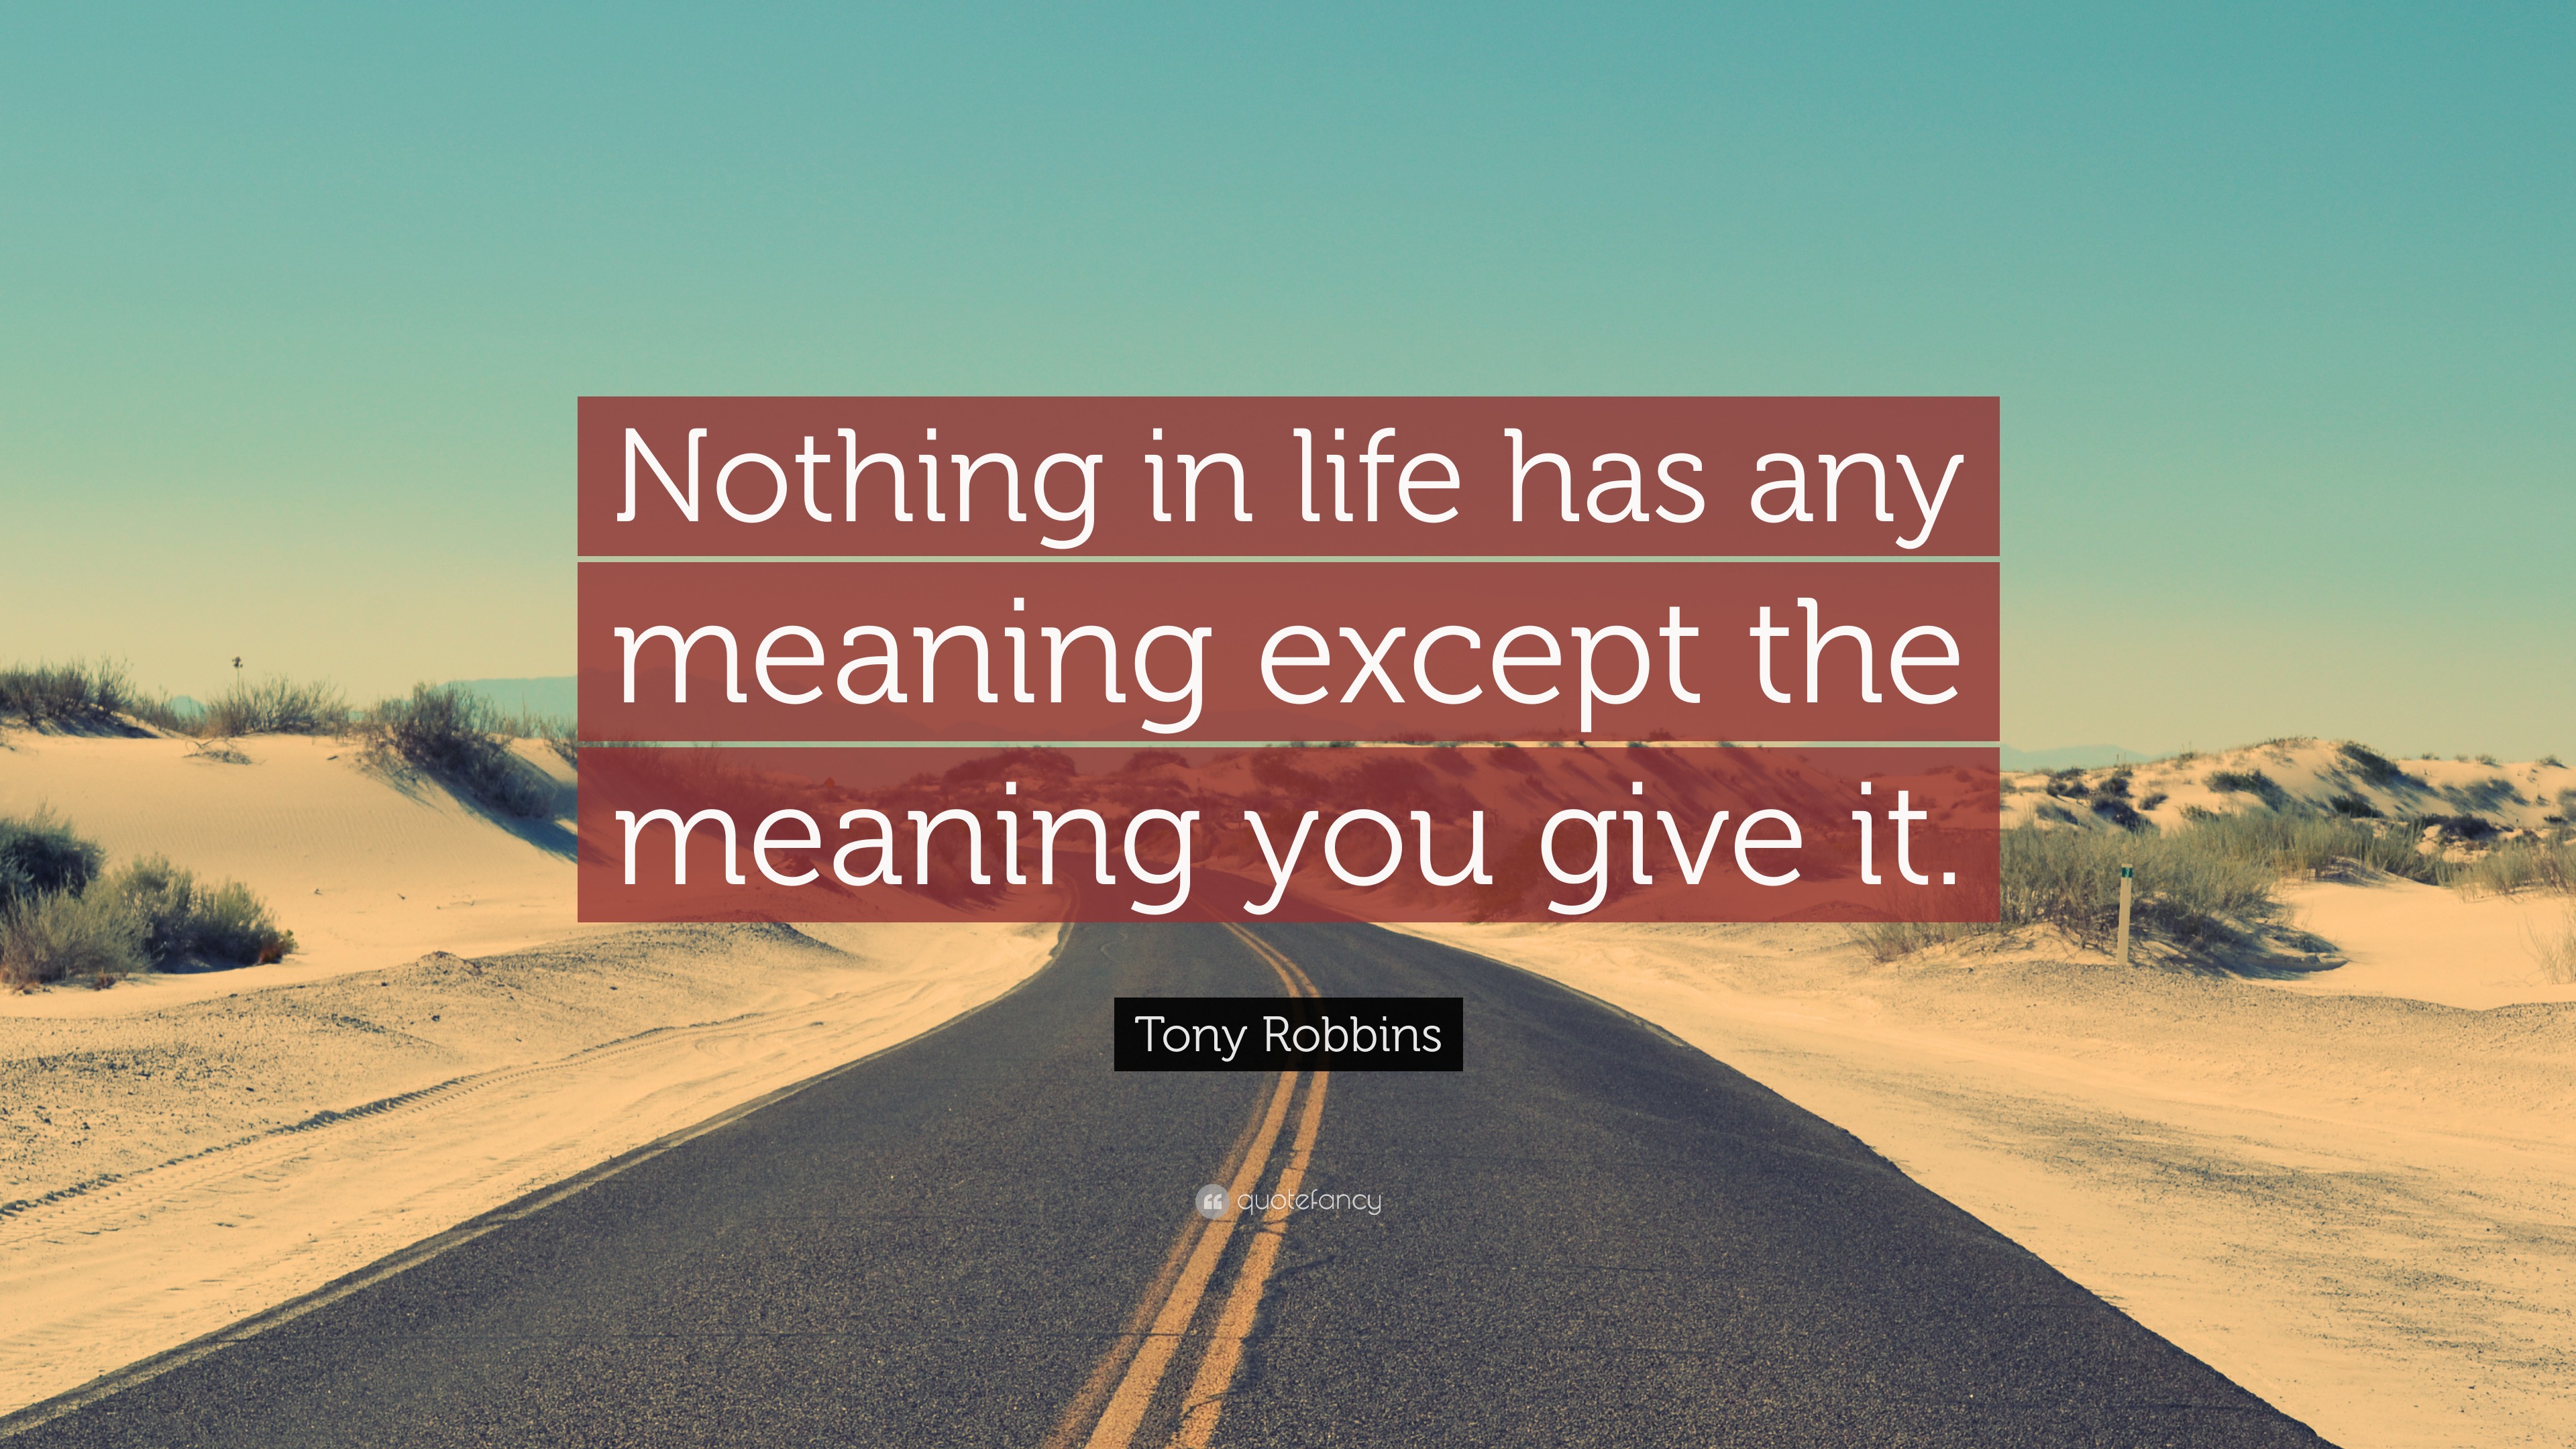 Tony Robbins Quote: “Nothing in life has any meaning except the meaning